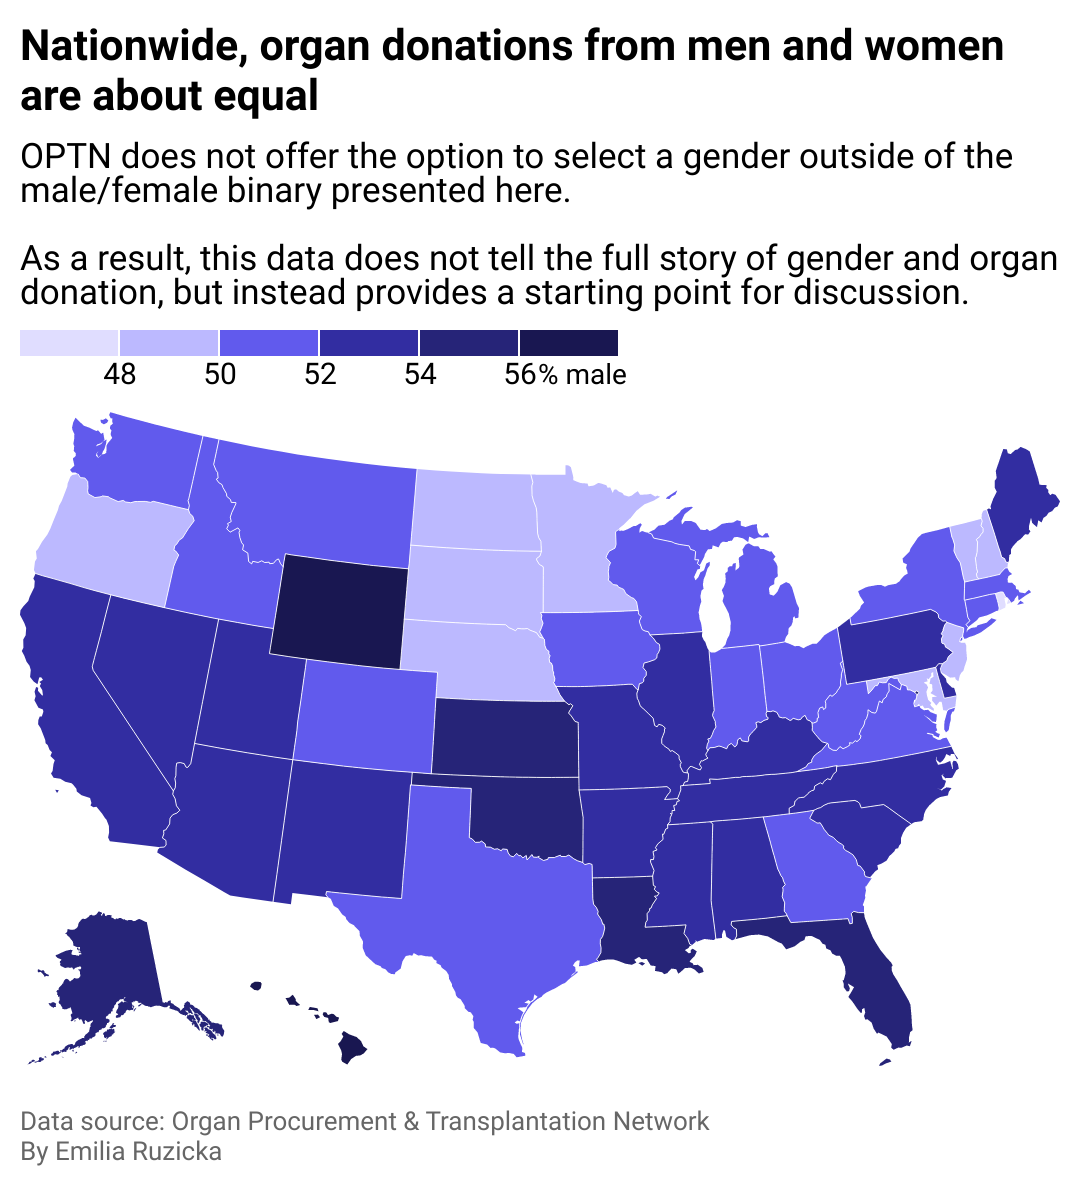 A map of the U.S. showing that nationwide, organ donations are about equal between men and women.